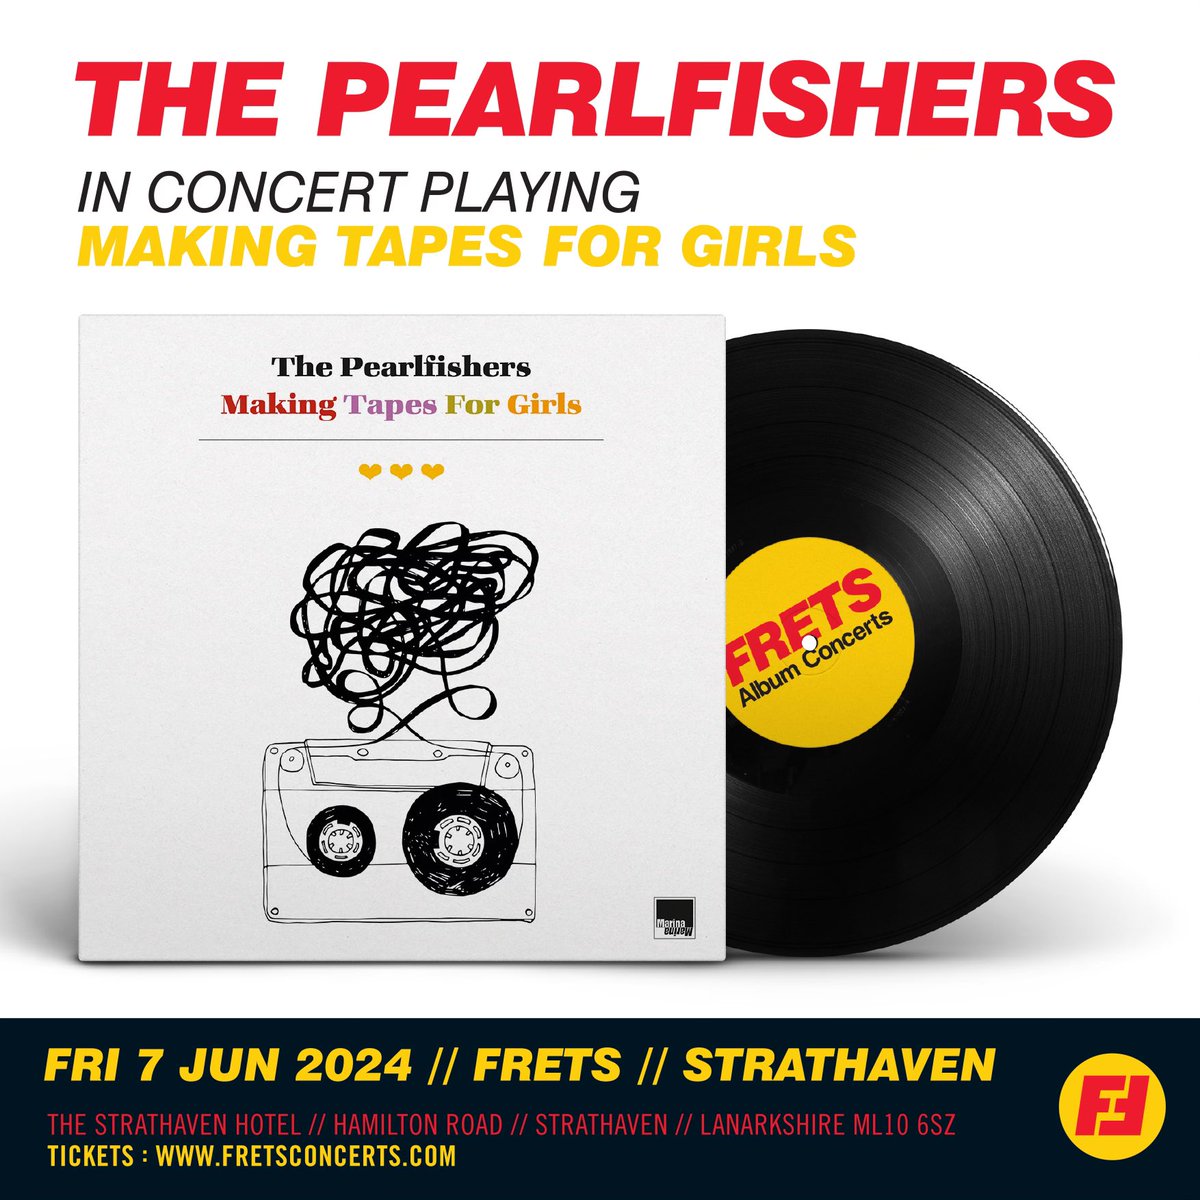 So delighted to accompany the album announcement with an exclusive concert performing ‘Making Tapes For Girls’ in full on June 7th 2024 at Strathaven Hotel with @FRETSCONCERTS . Ticket link below... 🤍 🎟️ wegottickets.com/event/614909